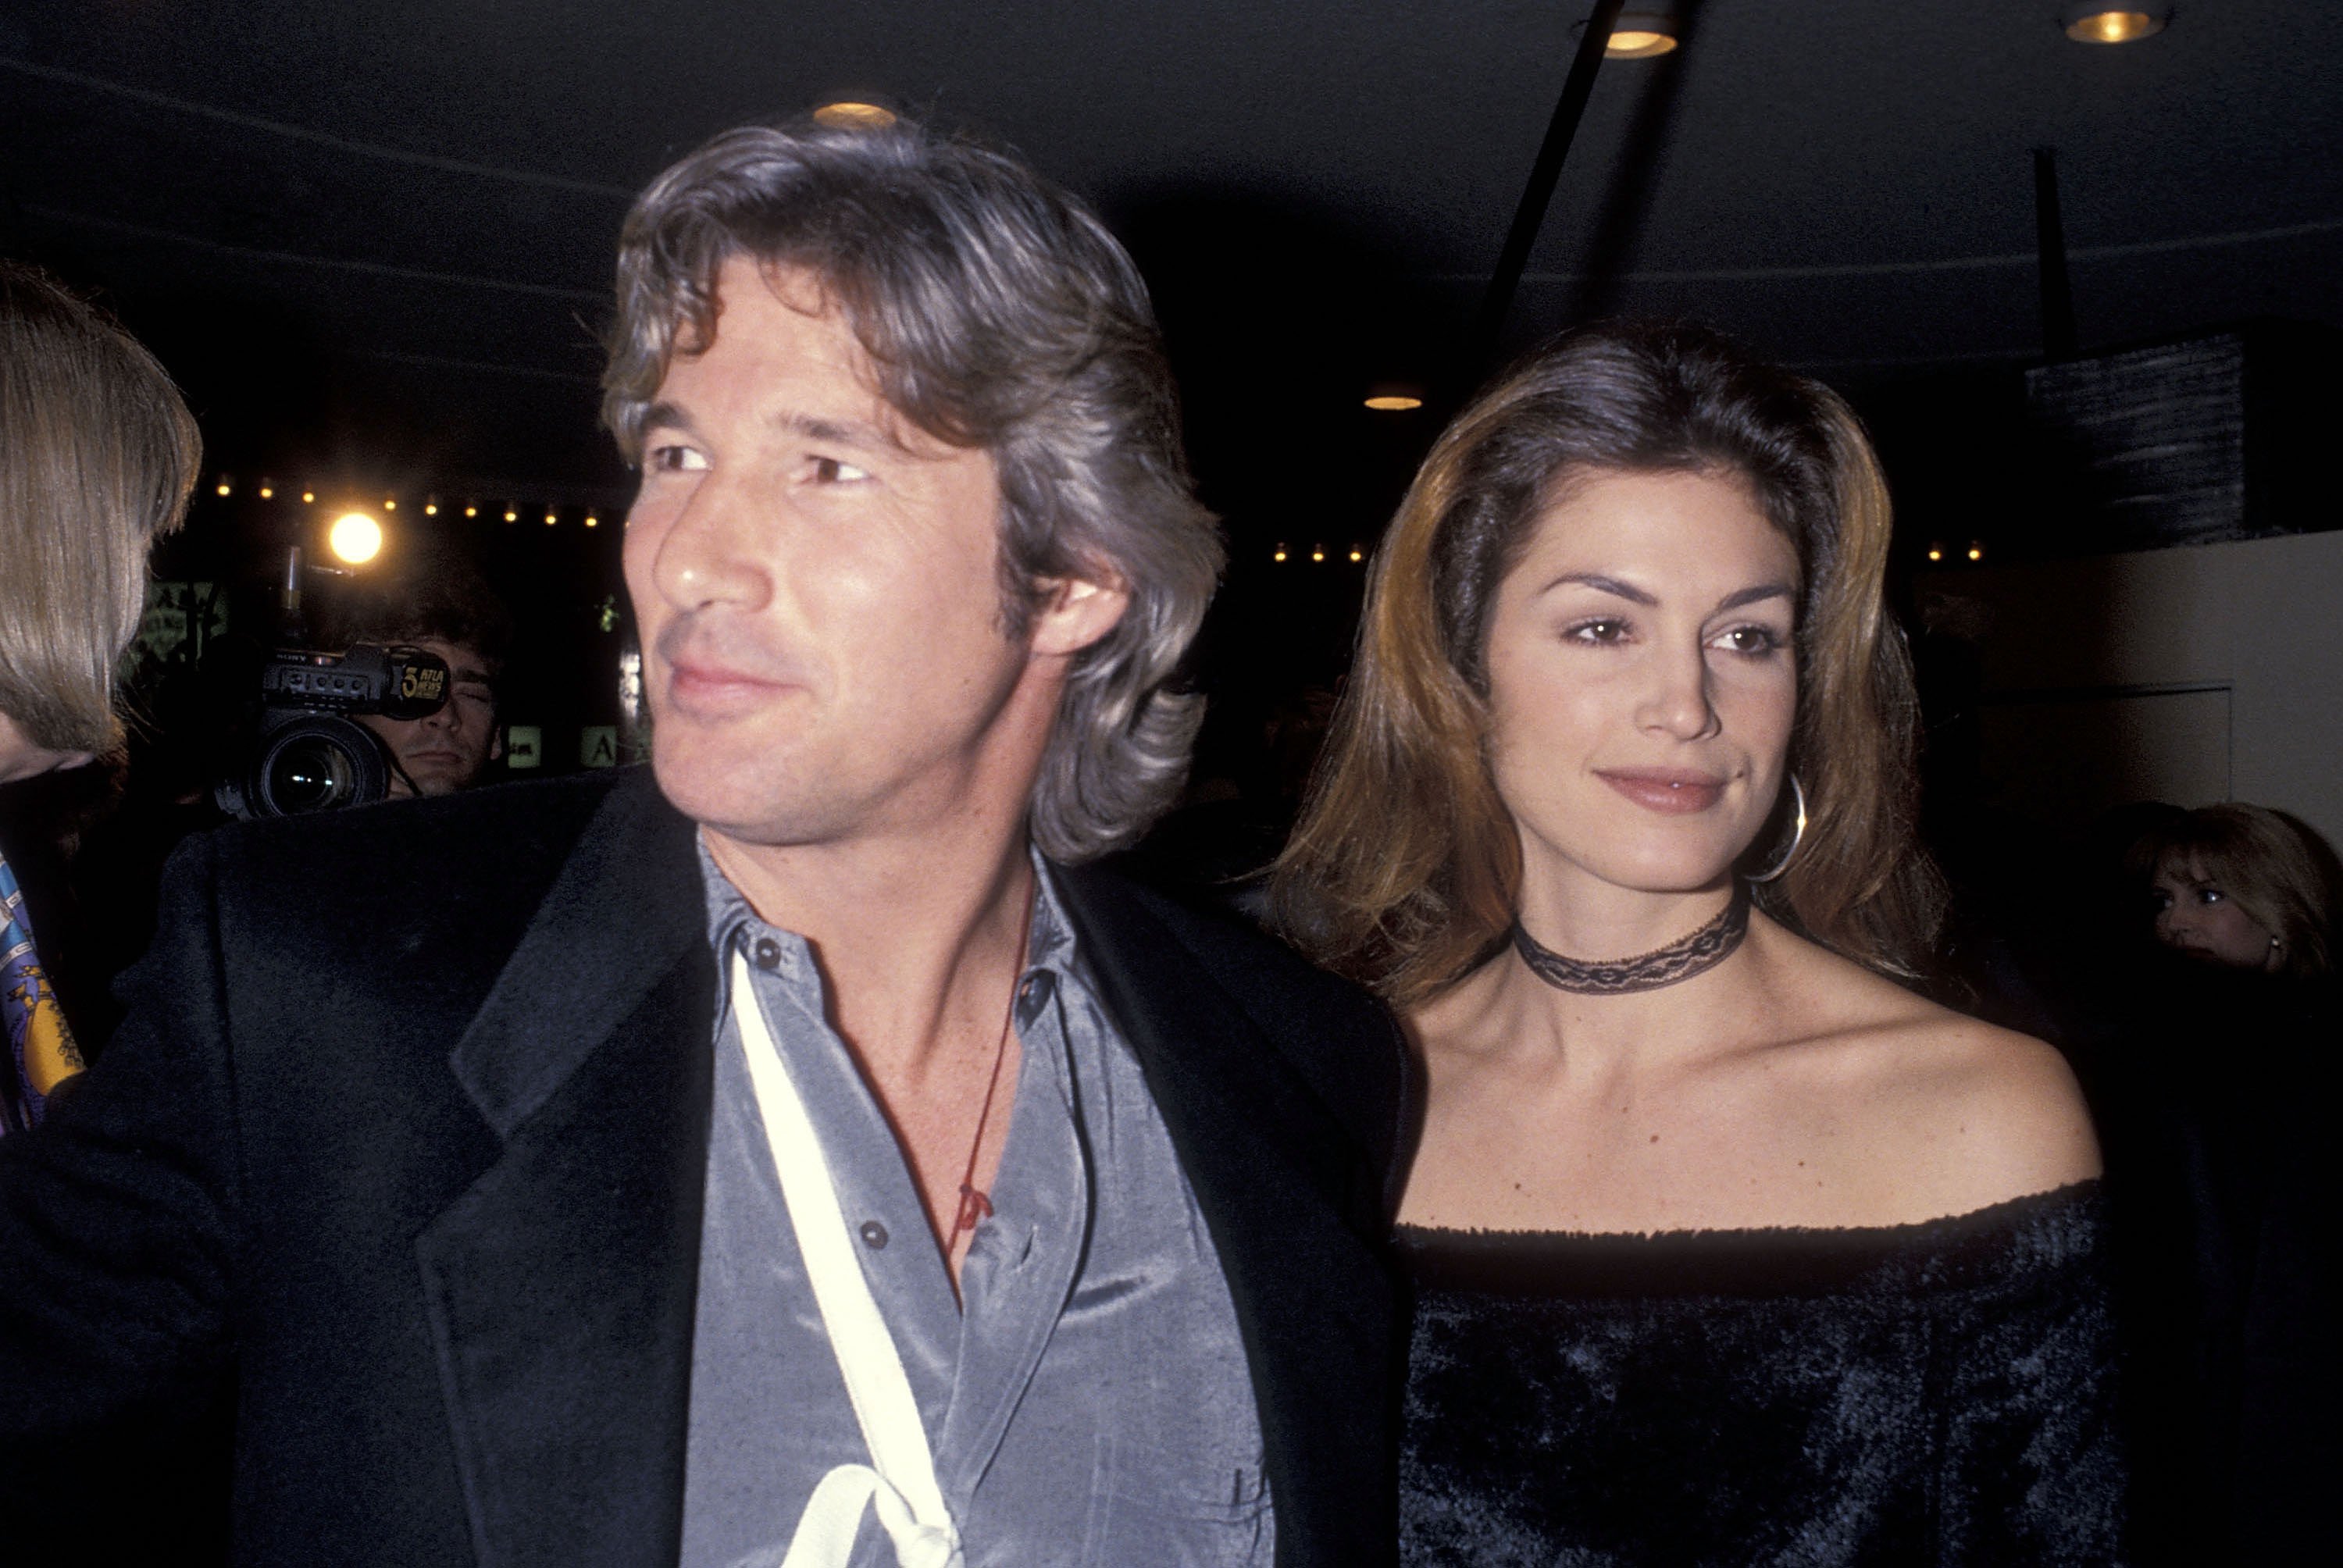 Richard Gere and Cindy Crawford at the "Sommersby" Westwood premiere on January 2, 1993, in Westwood, California | Source: Getty Images